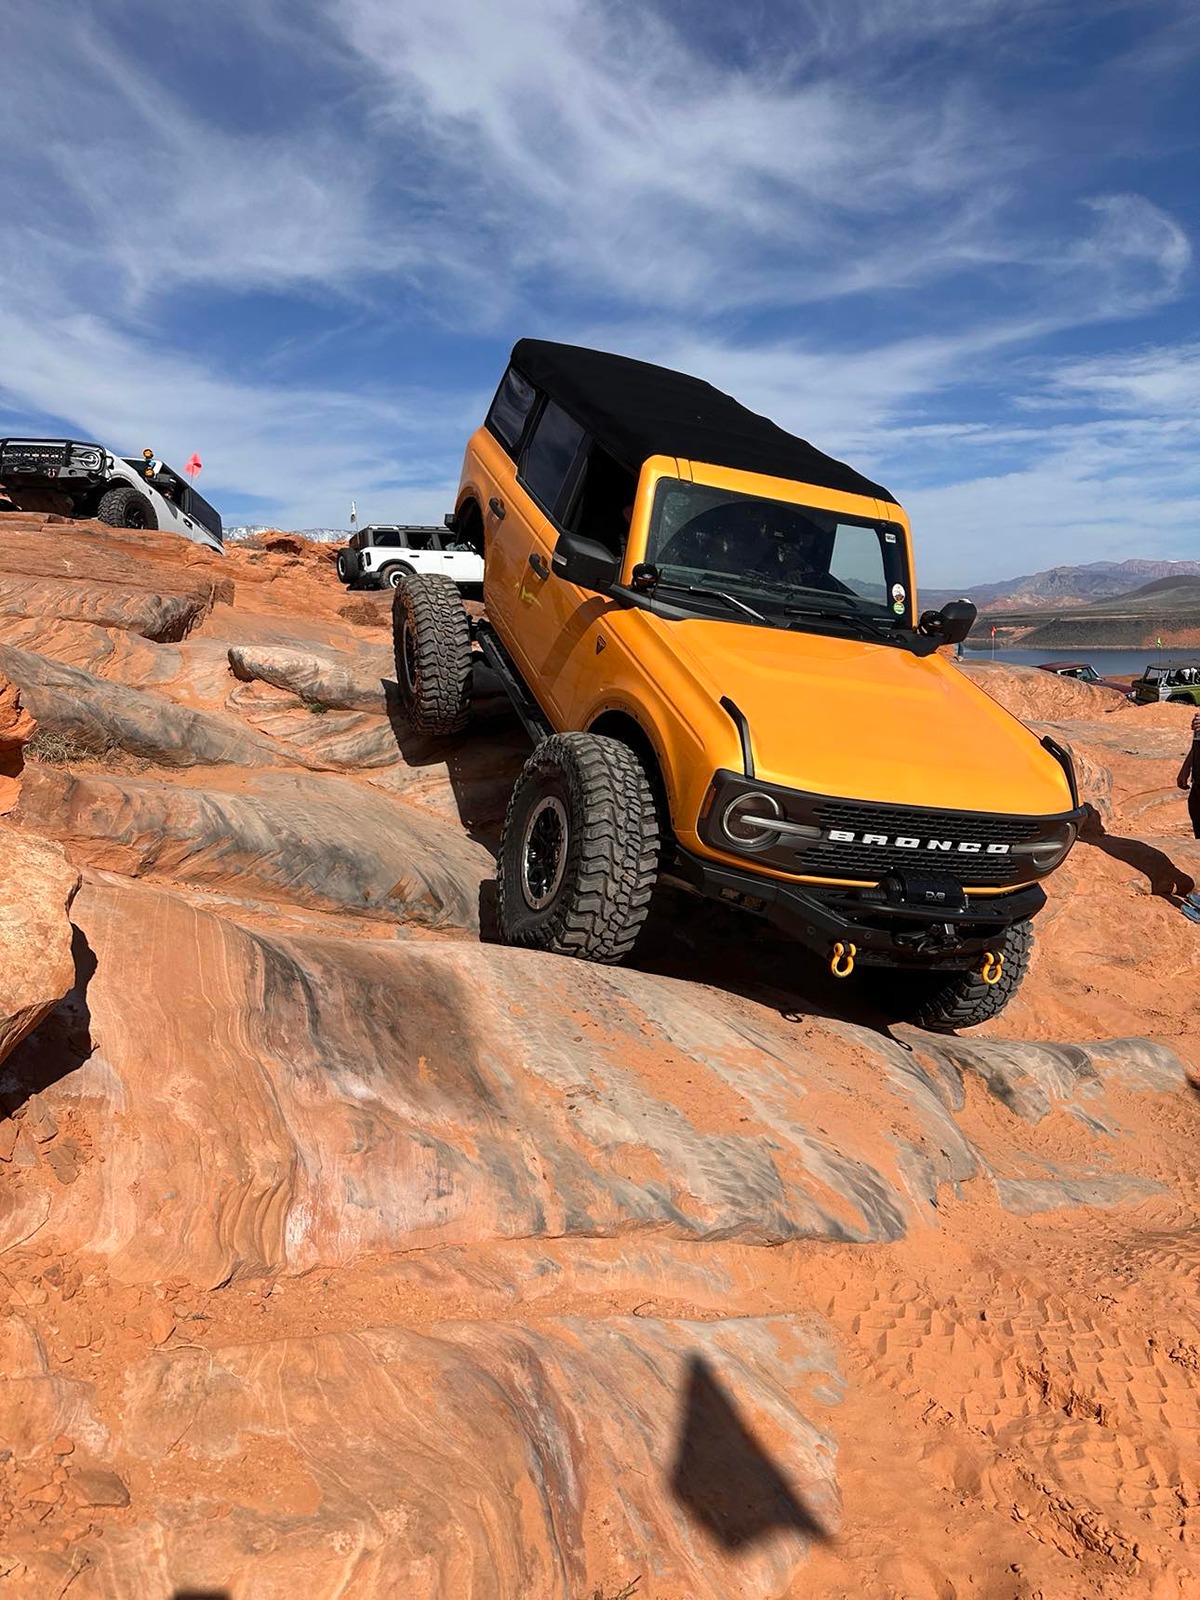 Ford Bronco 2021 Badlands Build - Tons of Mods from BroncBuster and More 1000007736